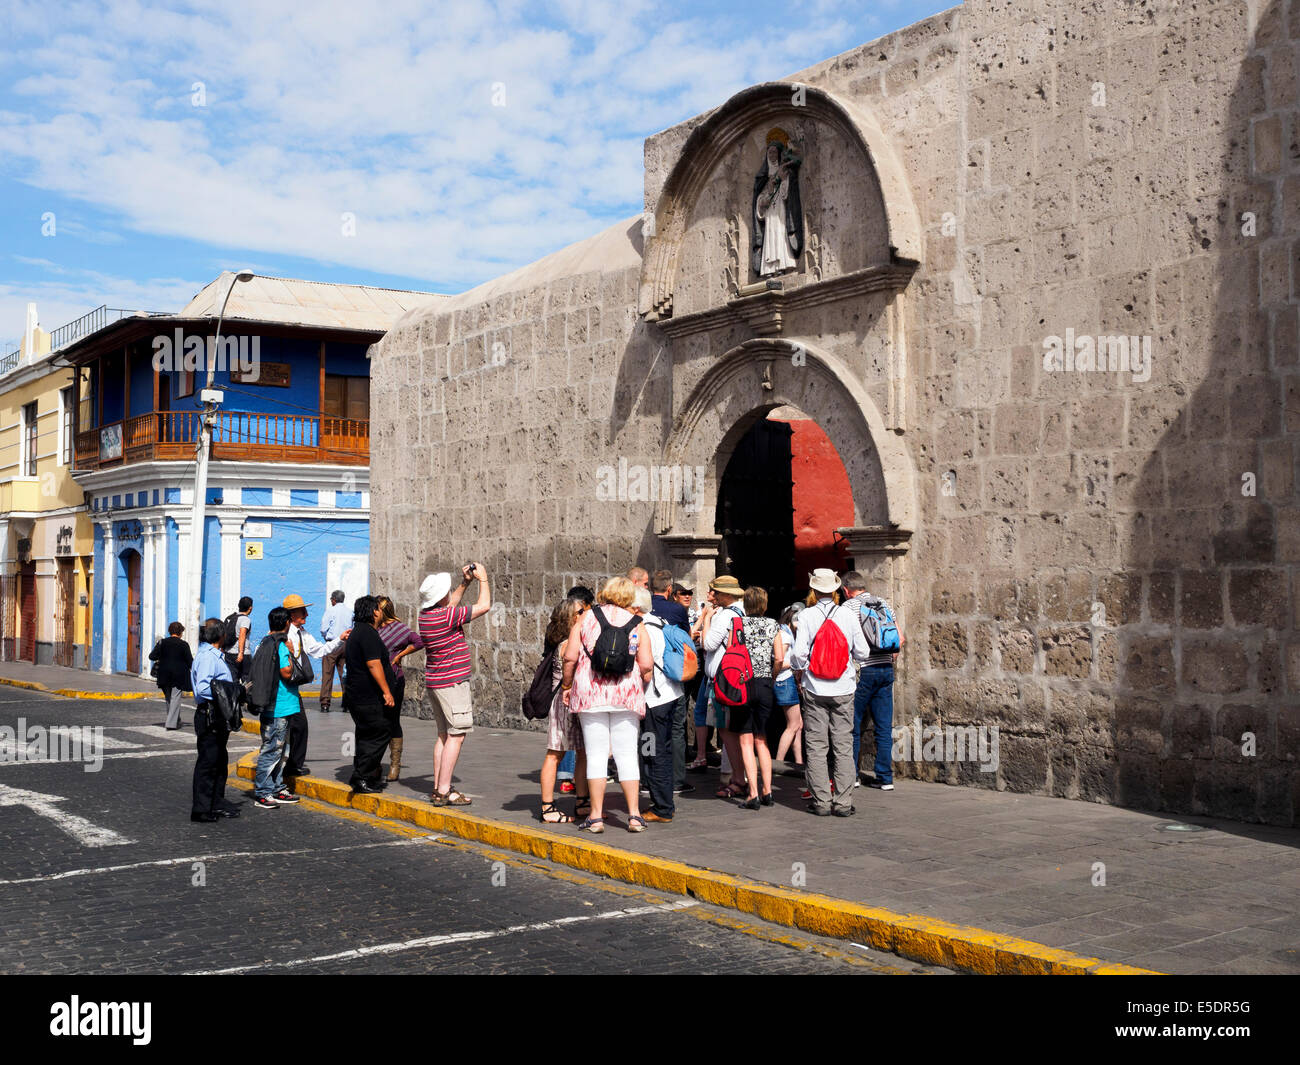 tourists at the Monastery of Saint Catherine's entrance - Arequipa, Peru Stock Photo